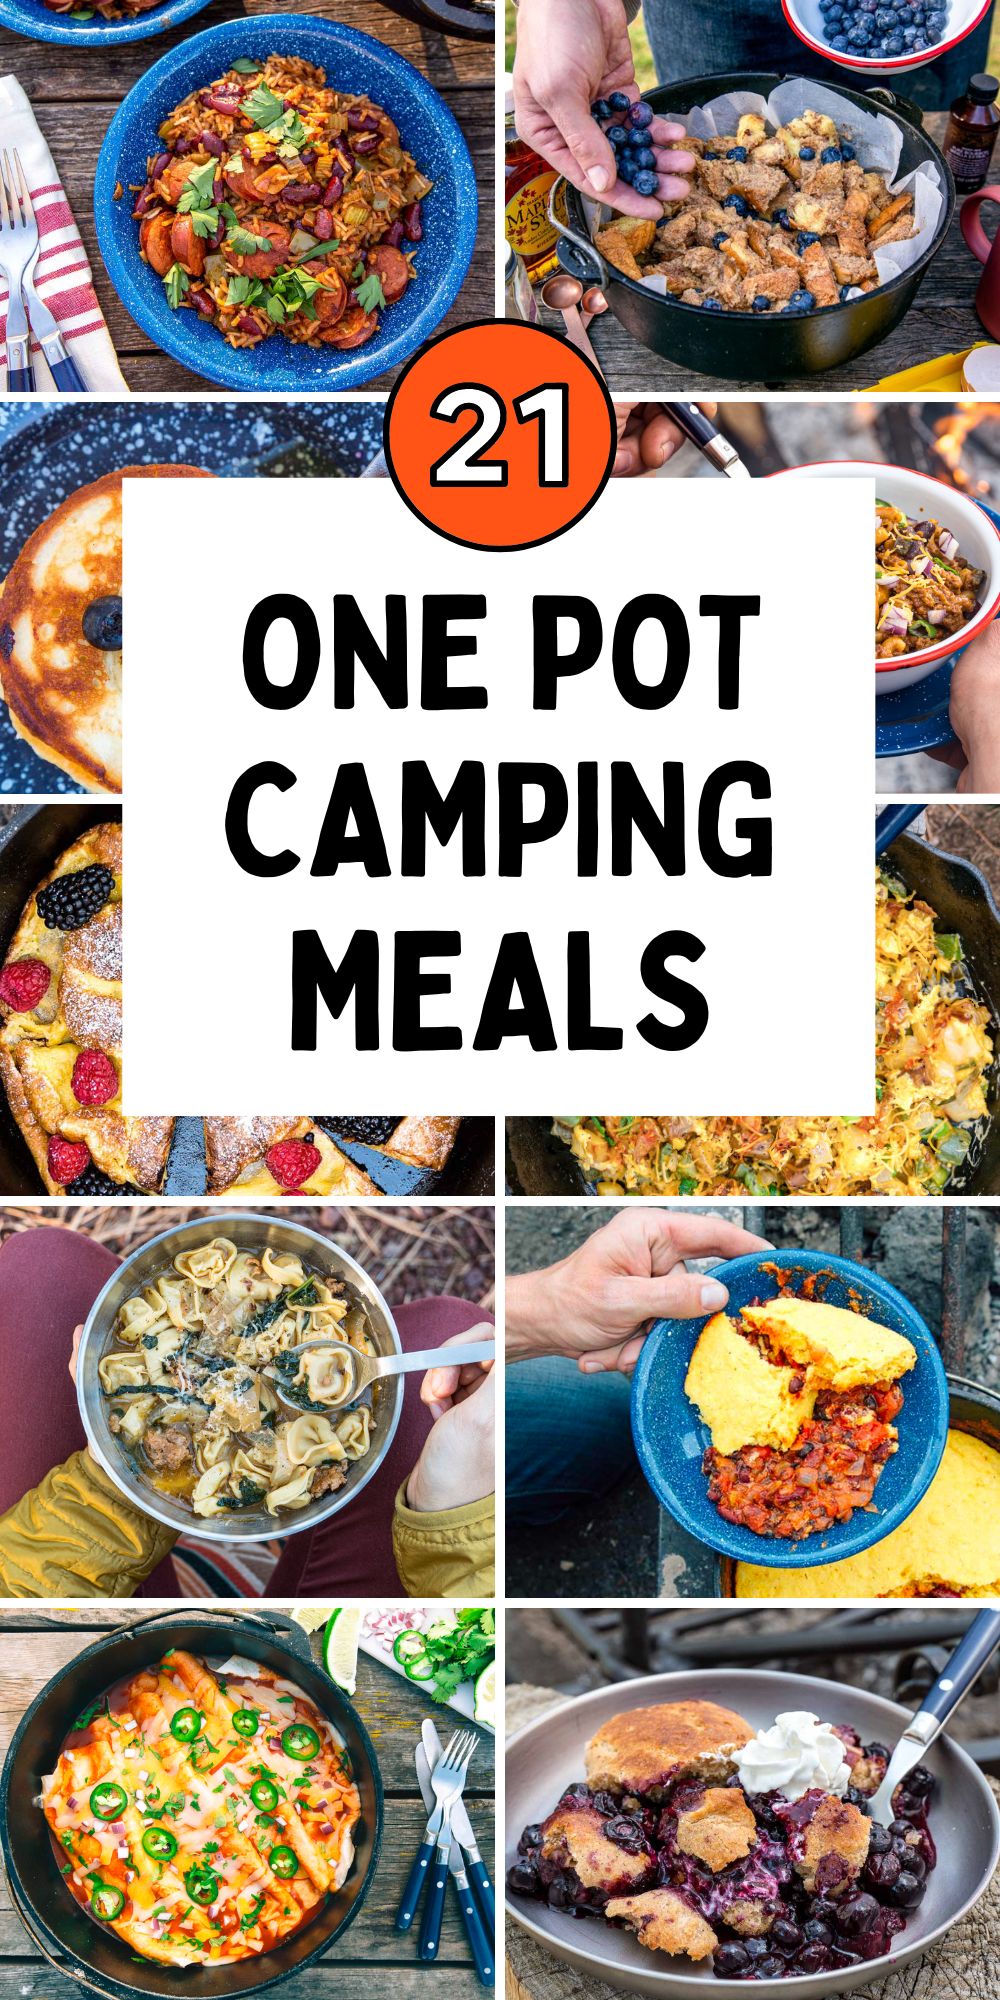 21 One Pot Tenting Meals - Nedchi Consult